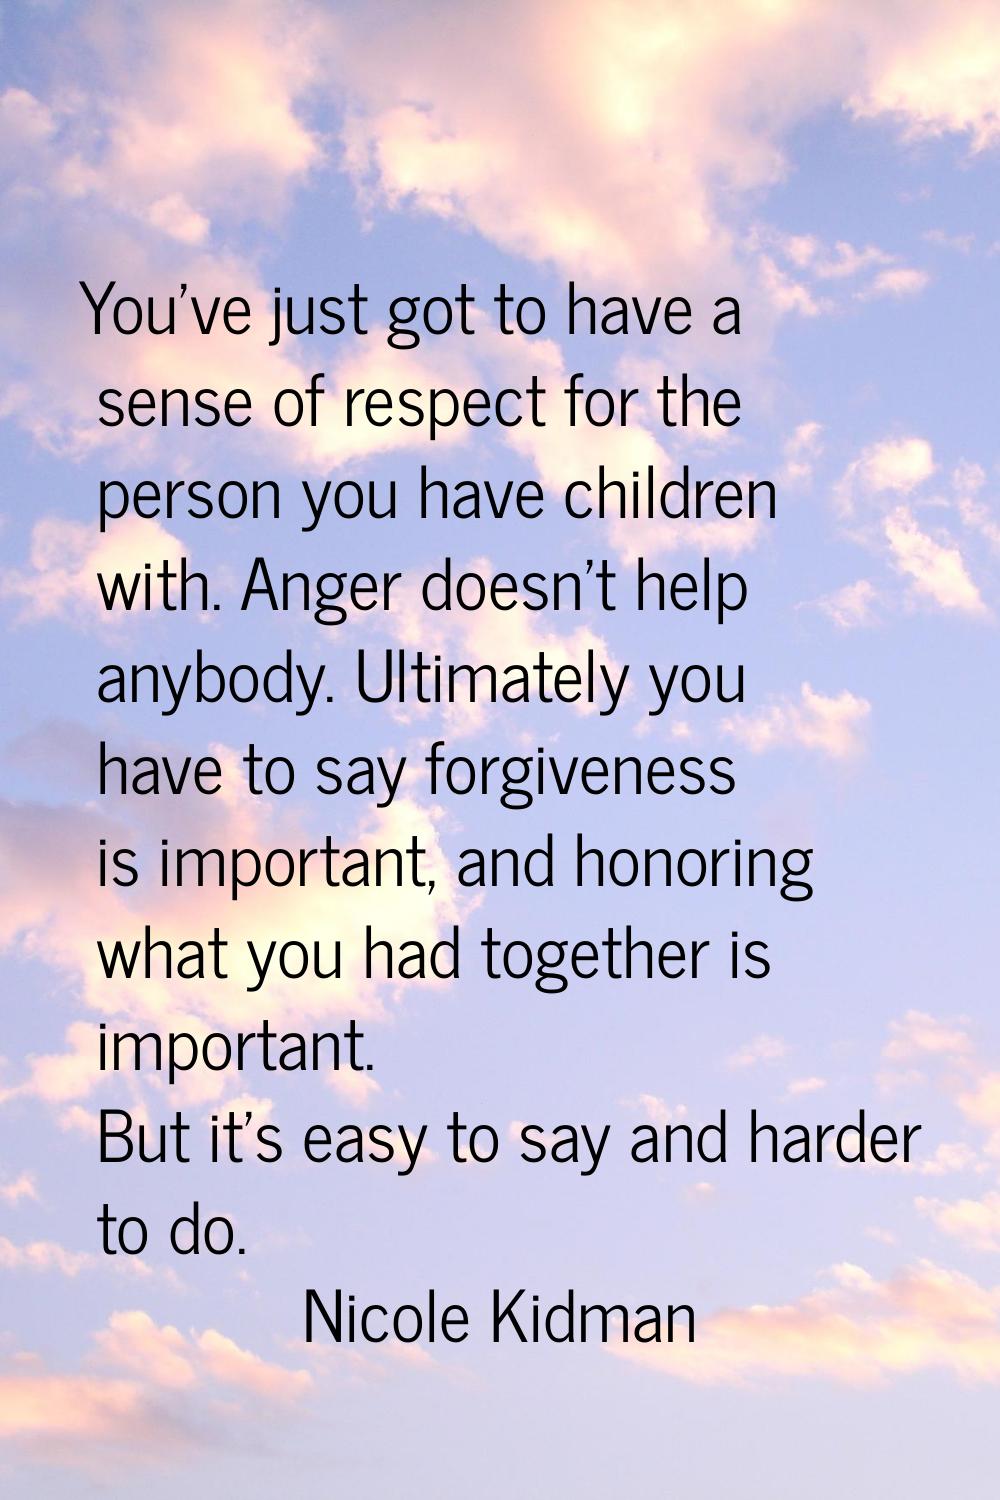 You've just got to have a sense of respect for the person you have children with. Anger doesn't hel